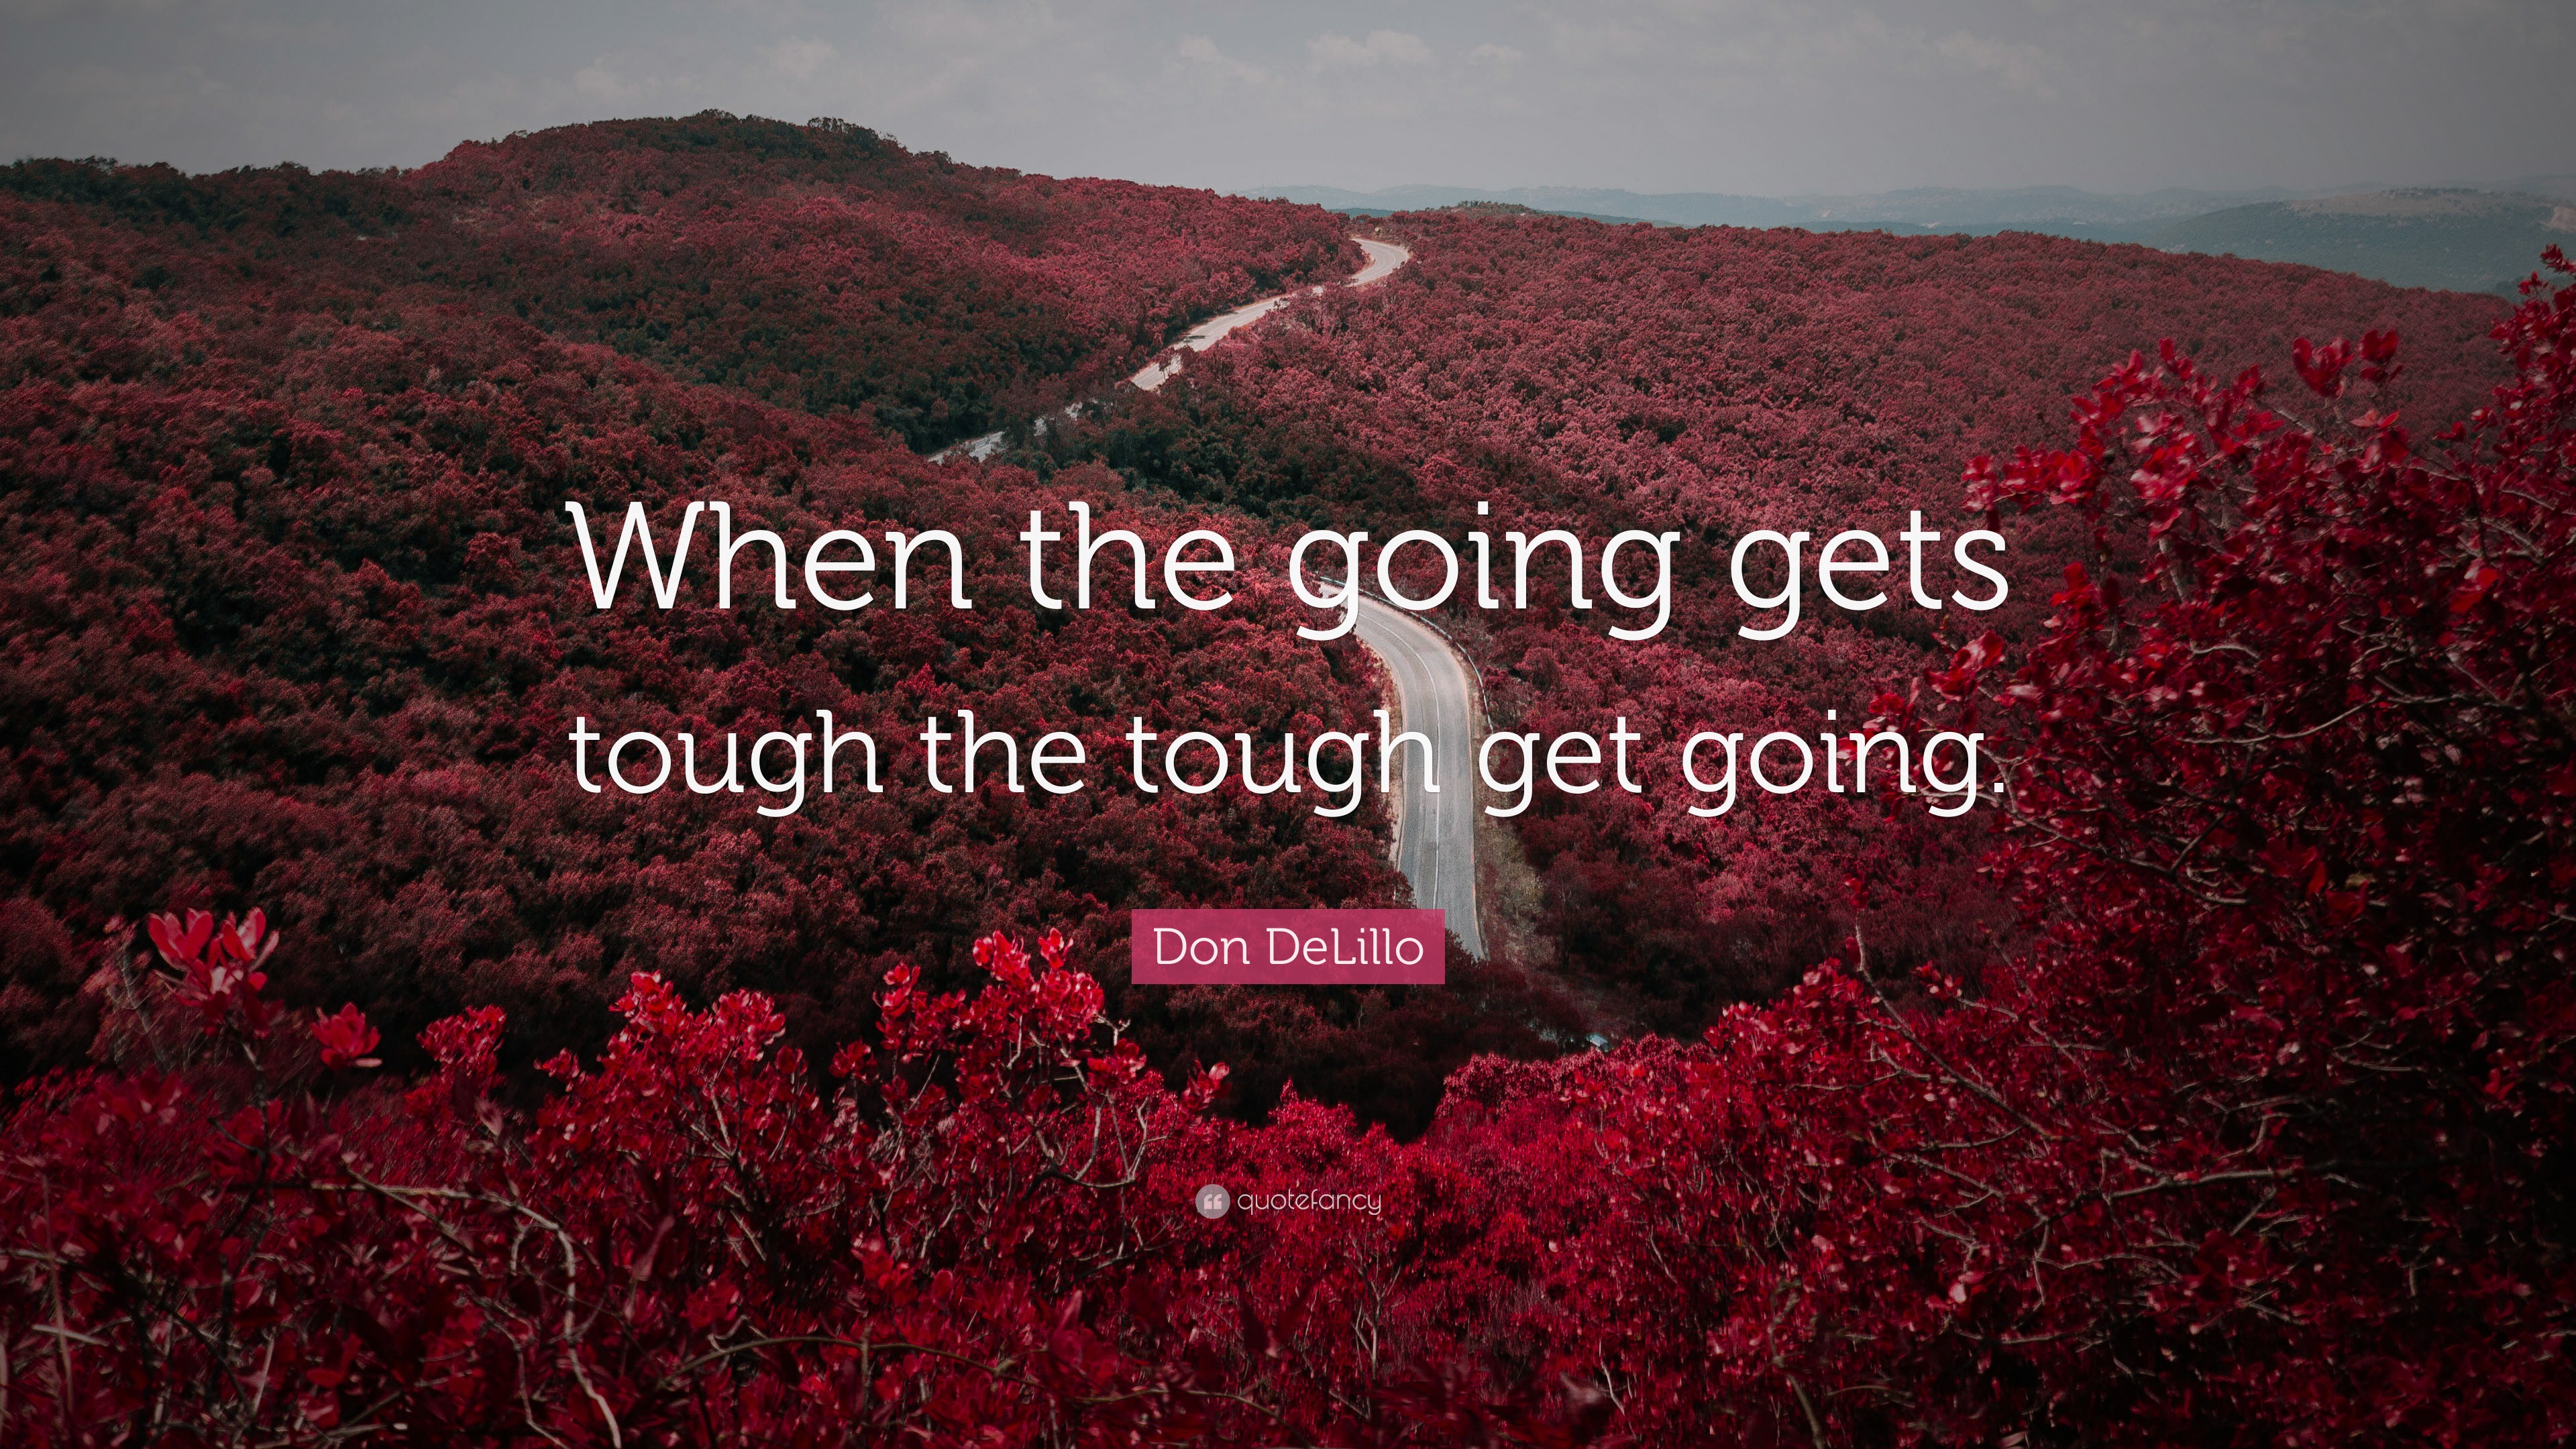 7693416 Don DeLillo Quote When The Going Gets Tough The Tough Get Going 